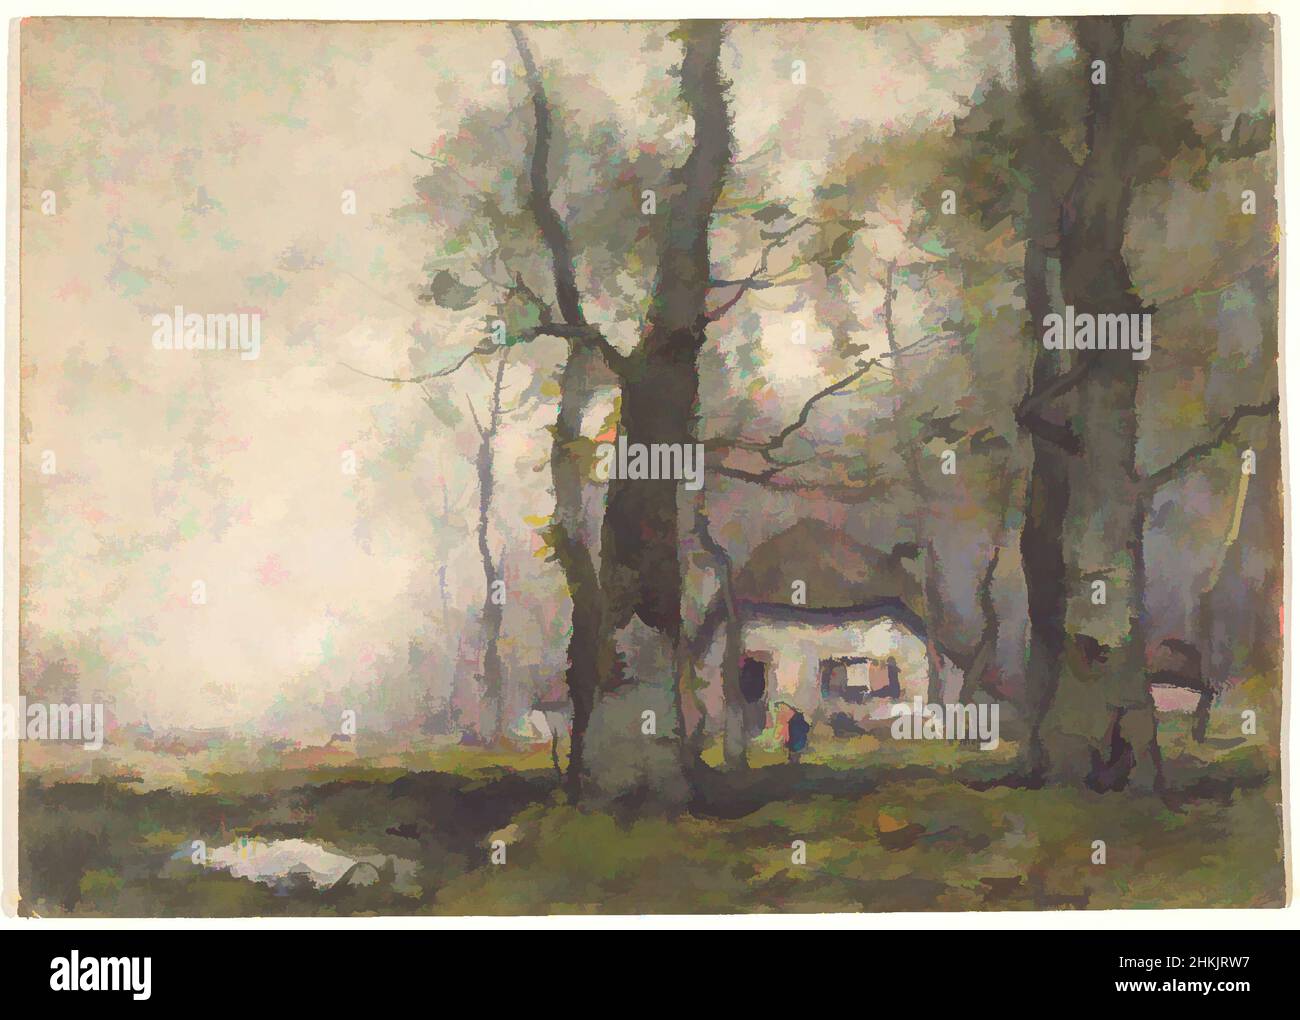 Art inspired by Lodge in the Woods, Henry Ward Ranger, American, 1858-1916, Watercolor on paper, 1891, 10 7/8 x 15 7/16 in., 27.6 x 29.2 cm, quiet, seclusion, woods, Classic works modernized by Artotop with a splash of modernity. Shapes, color and value, eye-catching visual impact on art. Emotions through freedom of artworks in a contemporary way. A timeless message pursuing a wildly creative new direction. Artists turning to the digital medium and creating the Artotop NFT Stock Photo